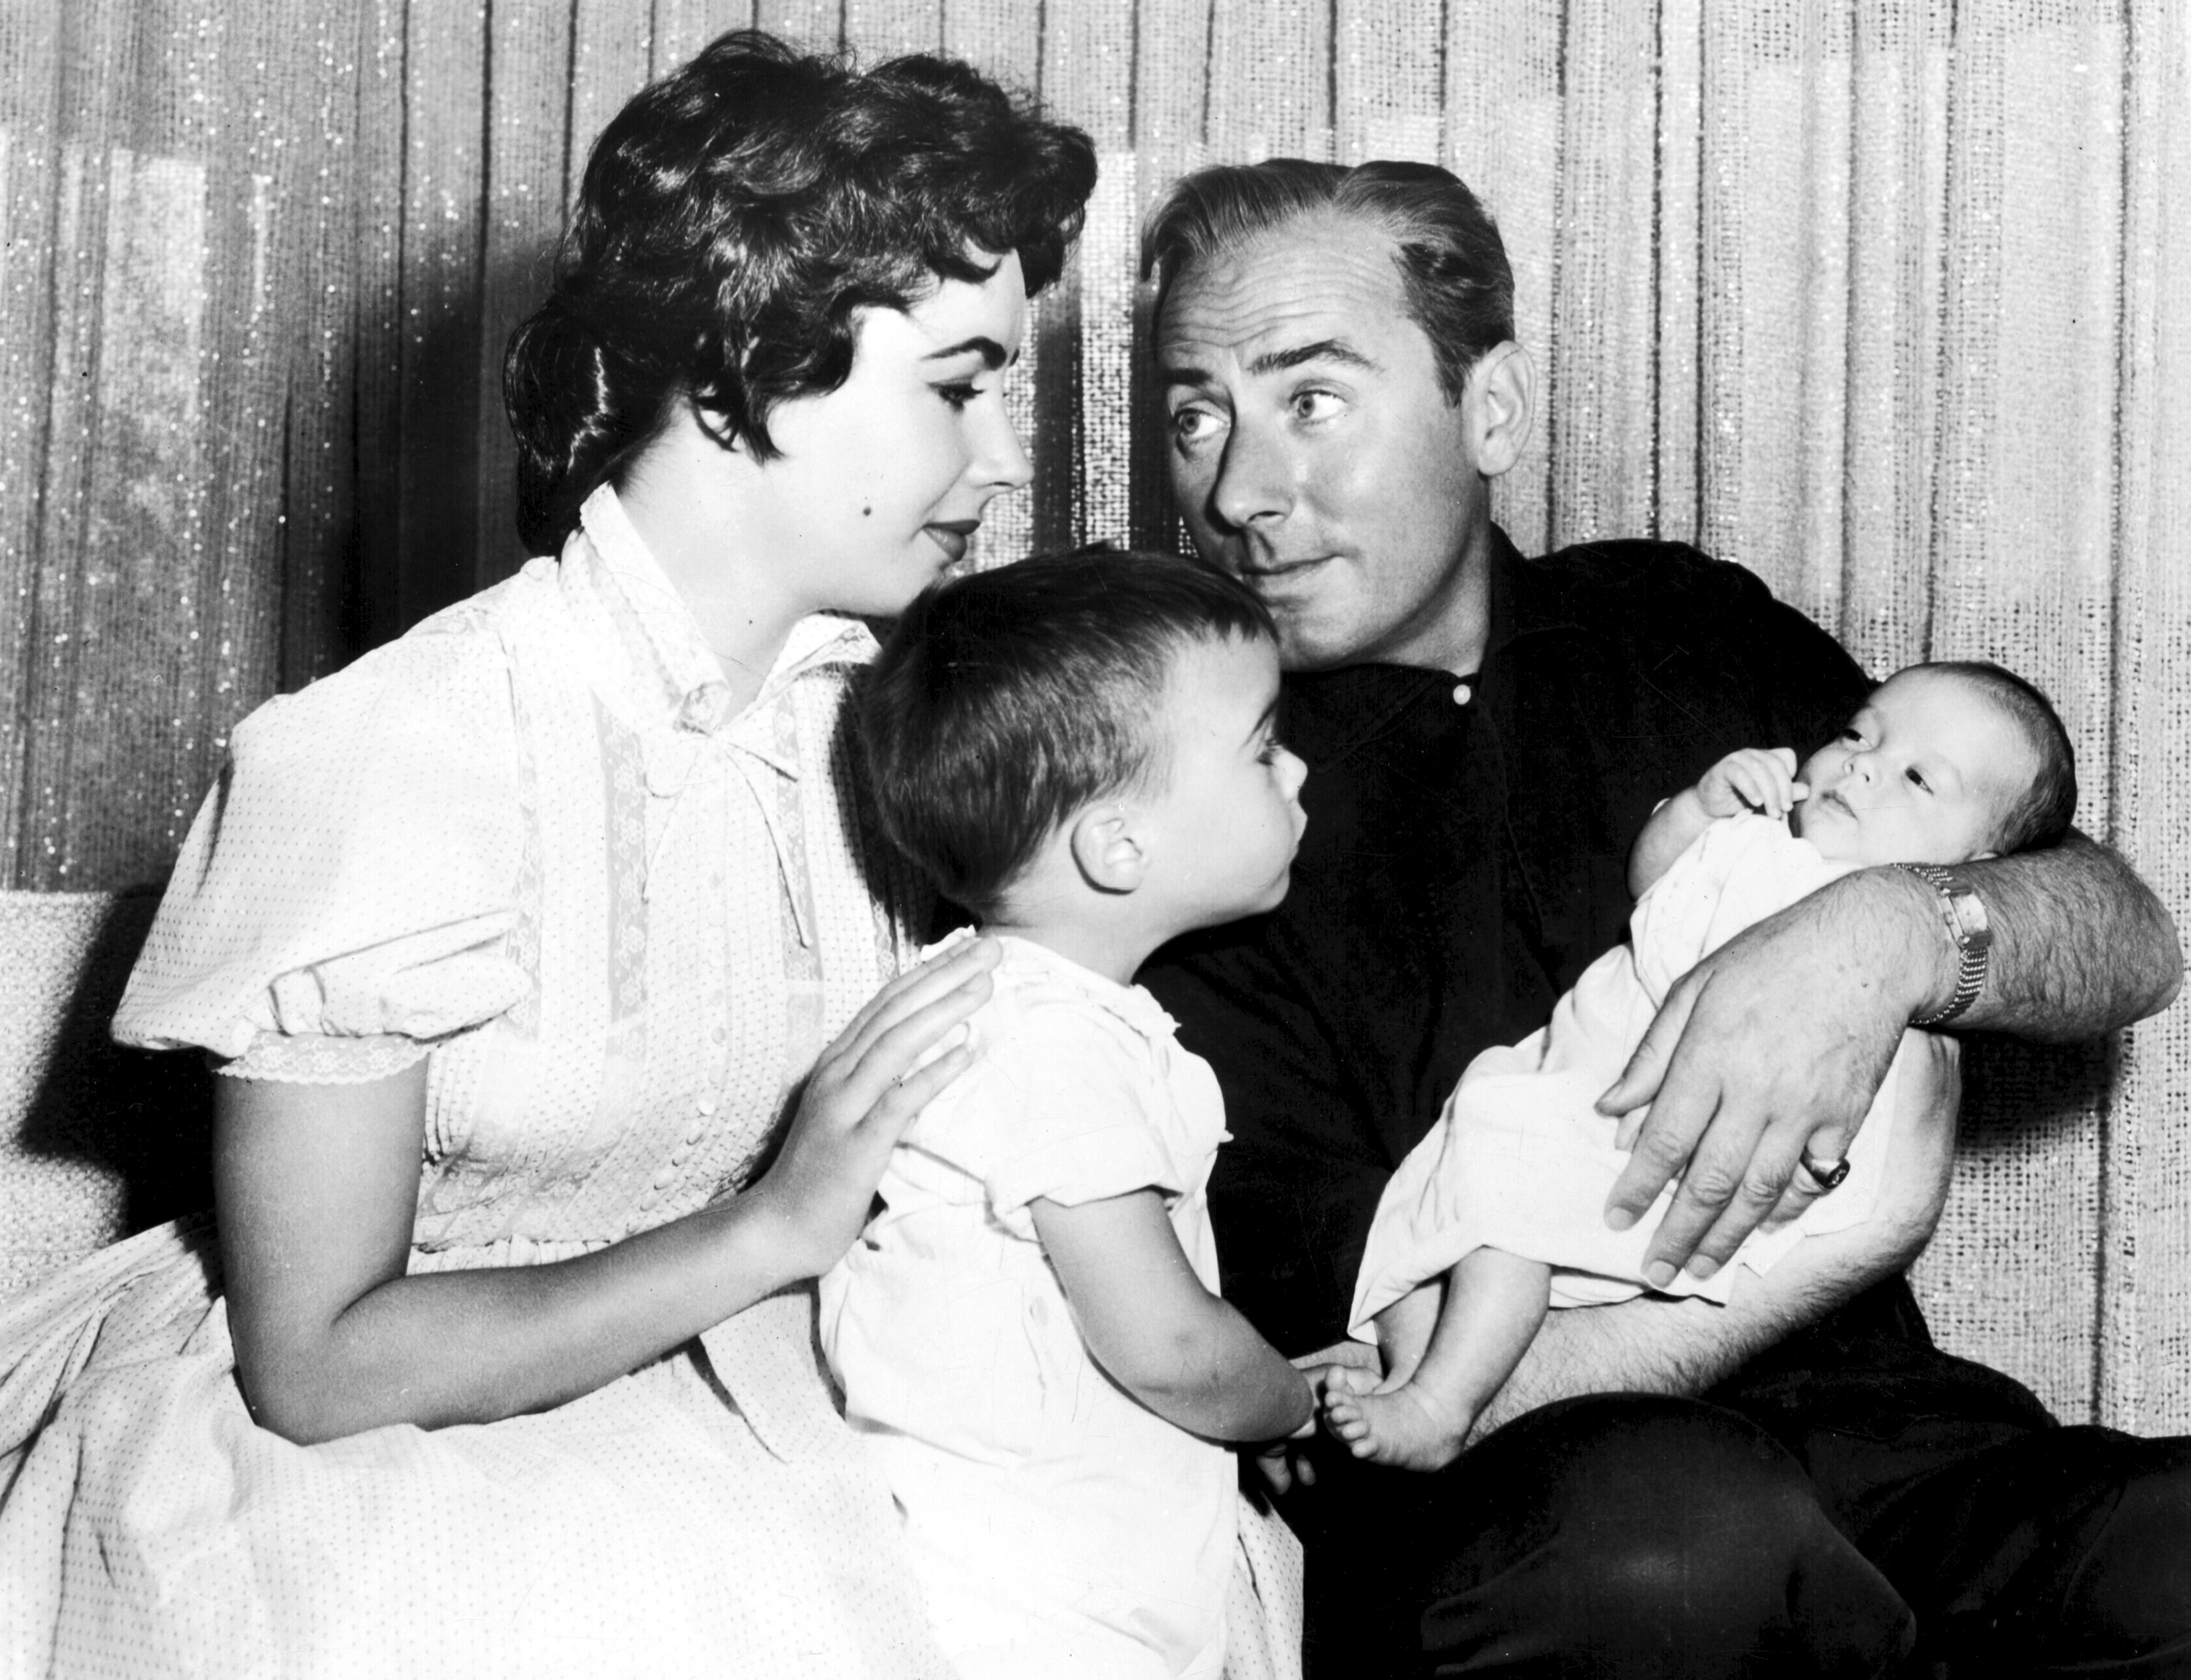 Actress Elizabeth Taylor (1932 - 2011) with second husband Michael Wilding, holding son Christopher Wilding while son Michael Wilding looks on, 1955 | Source: Getty Images